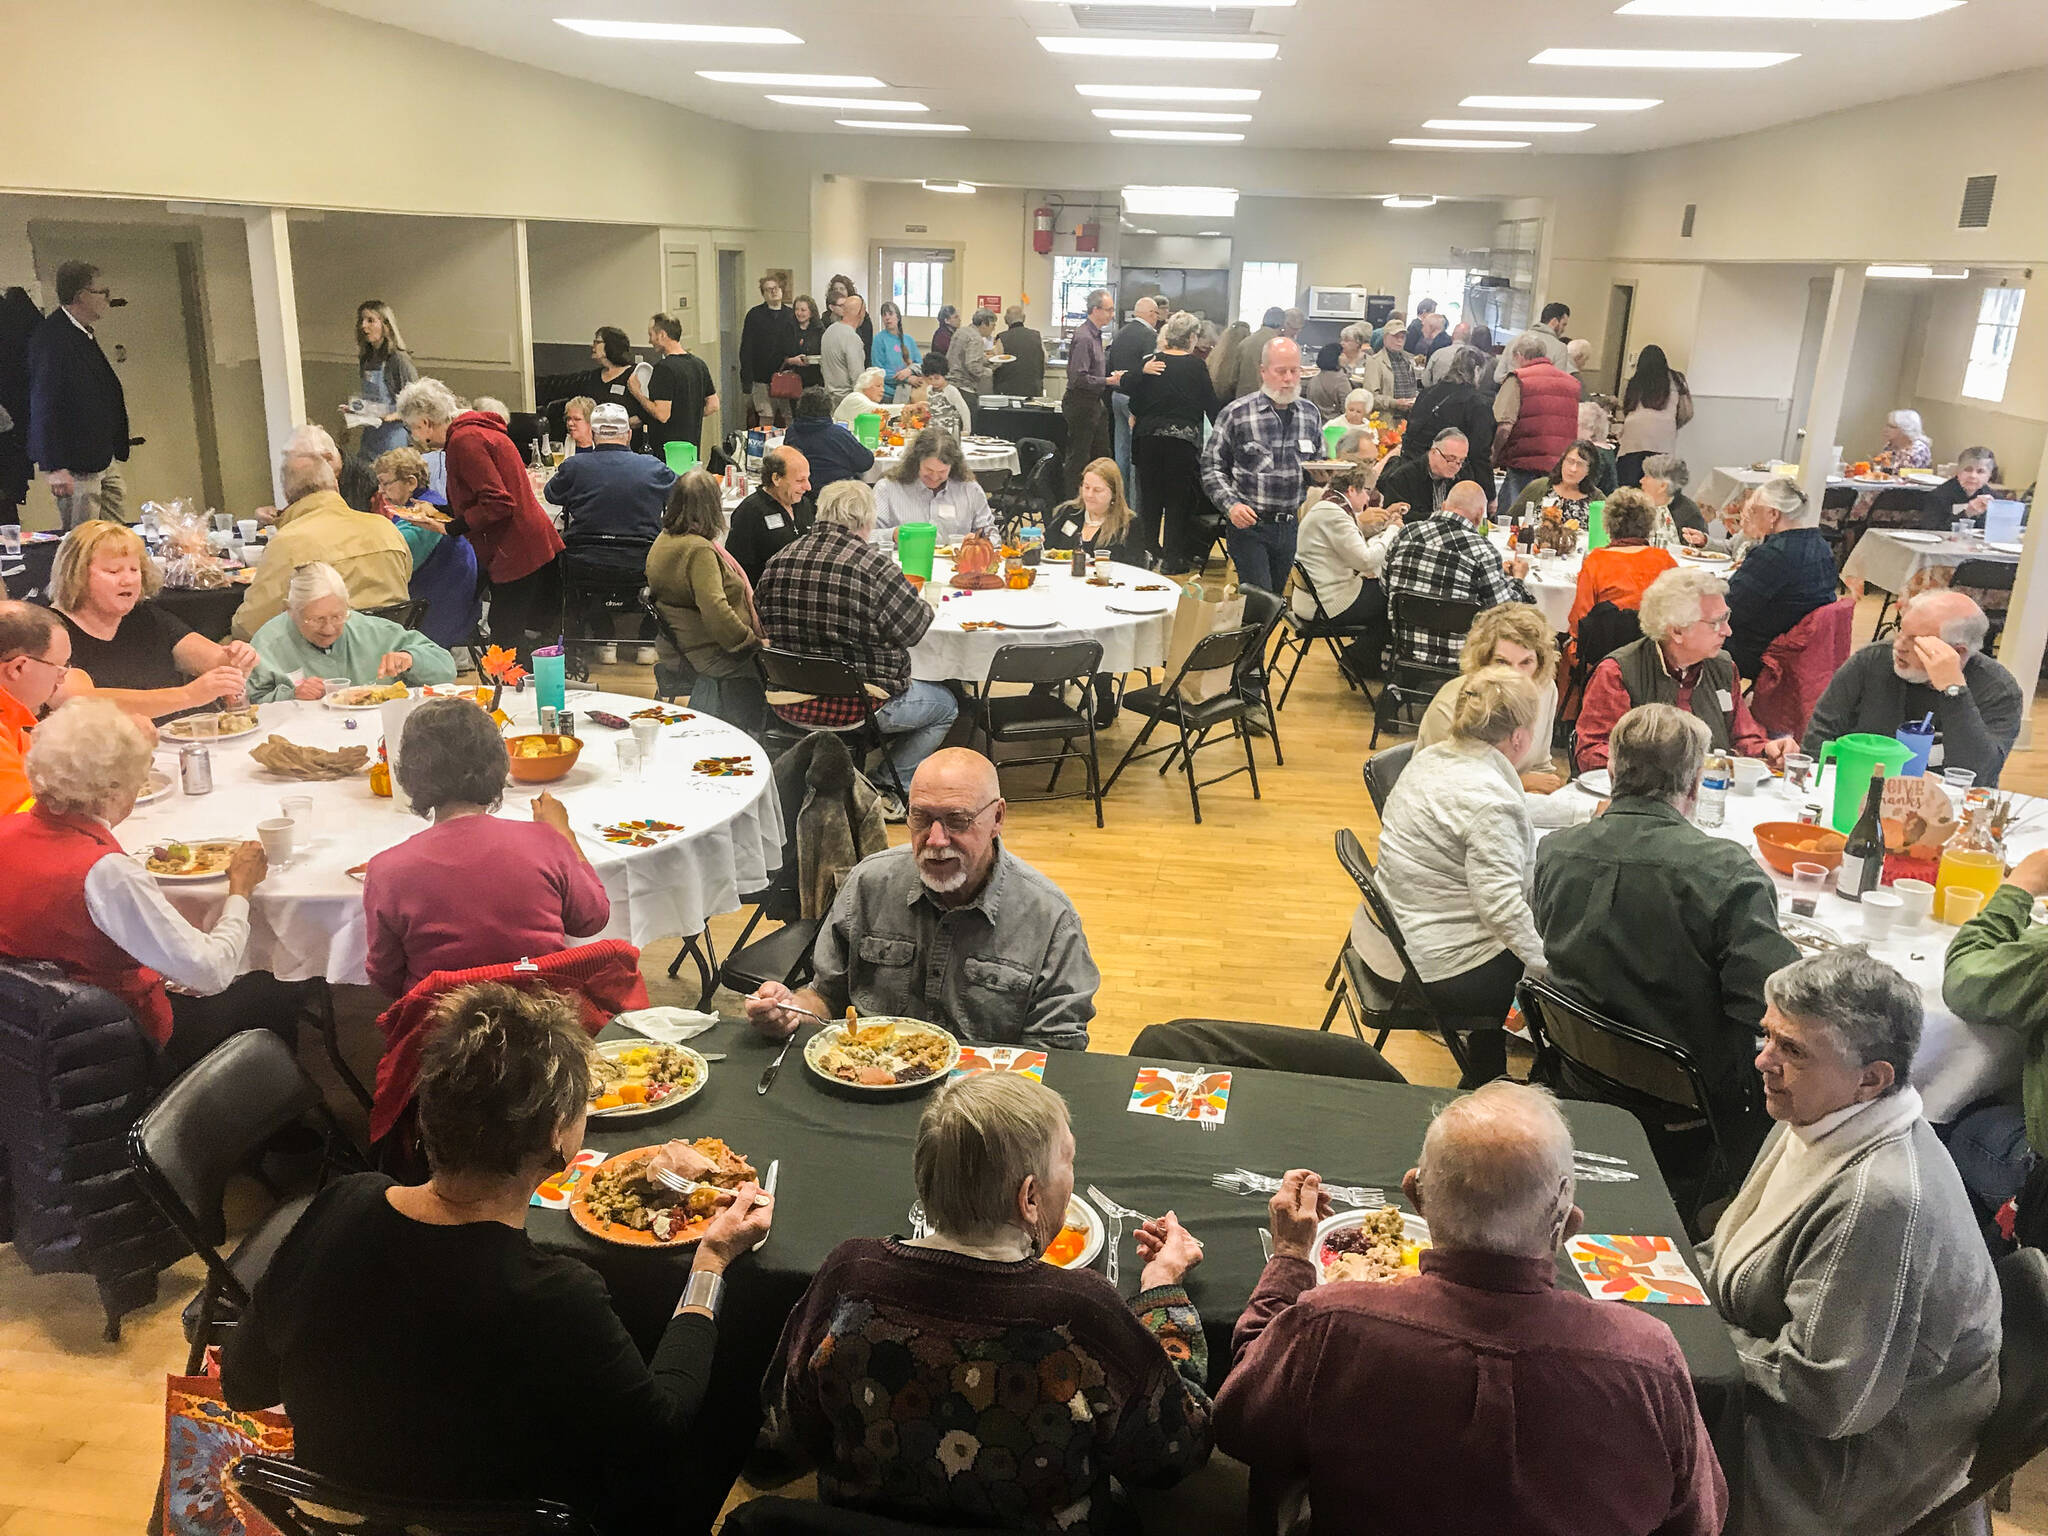 Residents feast and socialize at the community potluck at the Coupeville Rec Hall. (Photo provided)